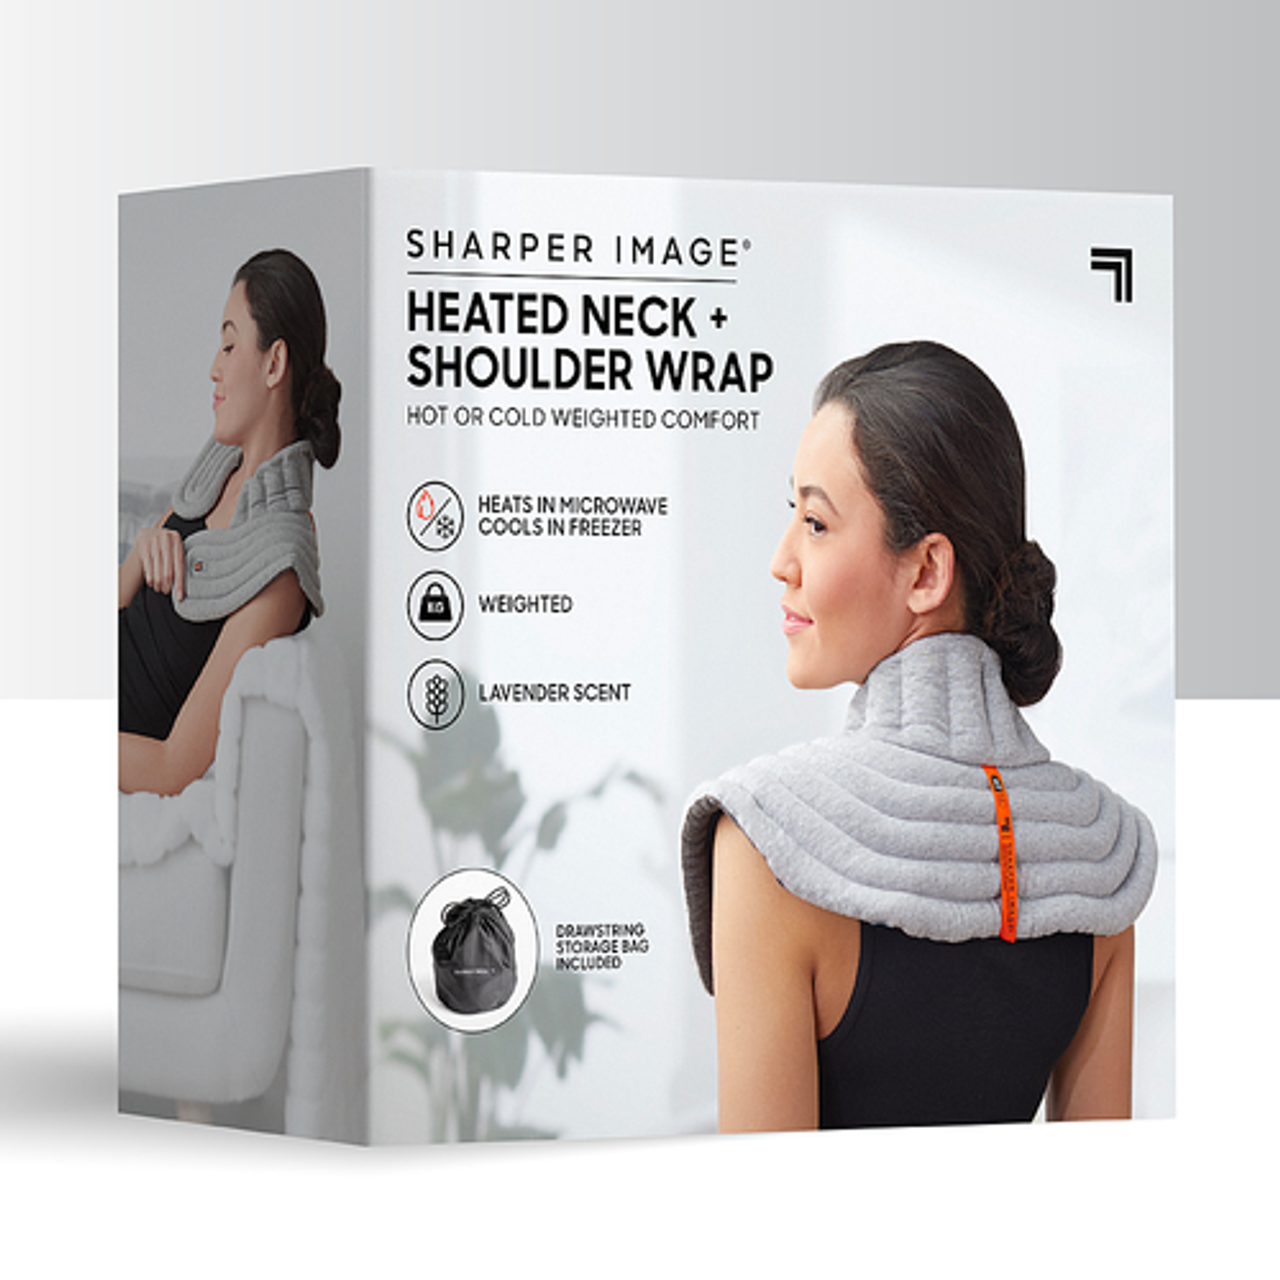 Sharper Image Heated Neck and Shoulder Aromatherapy Wrap, Lavender Scented Hot/Cold - Grey